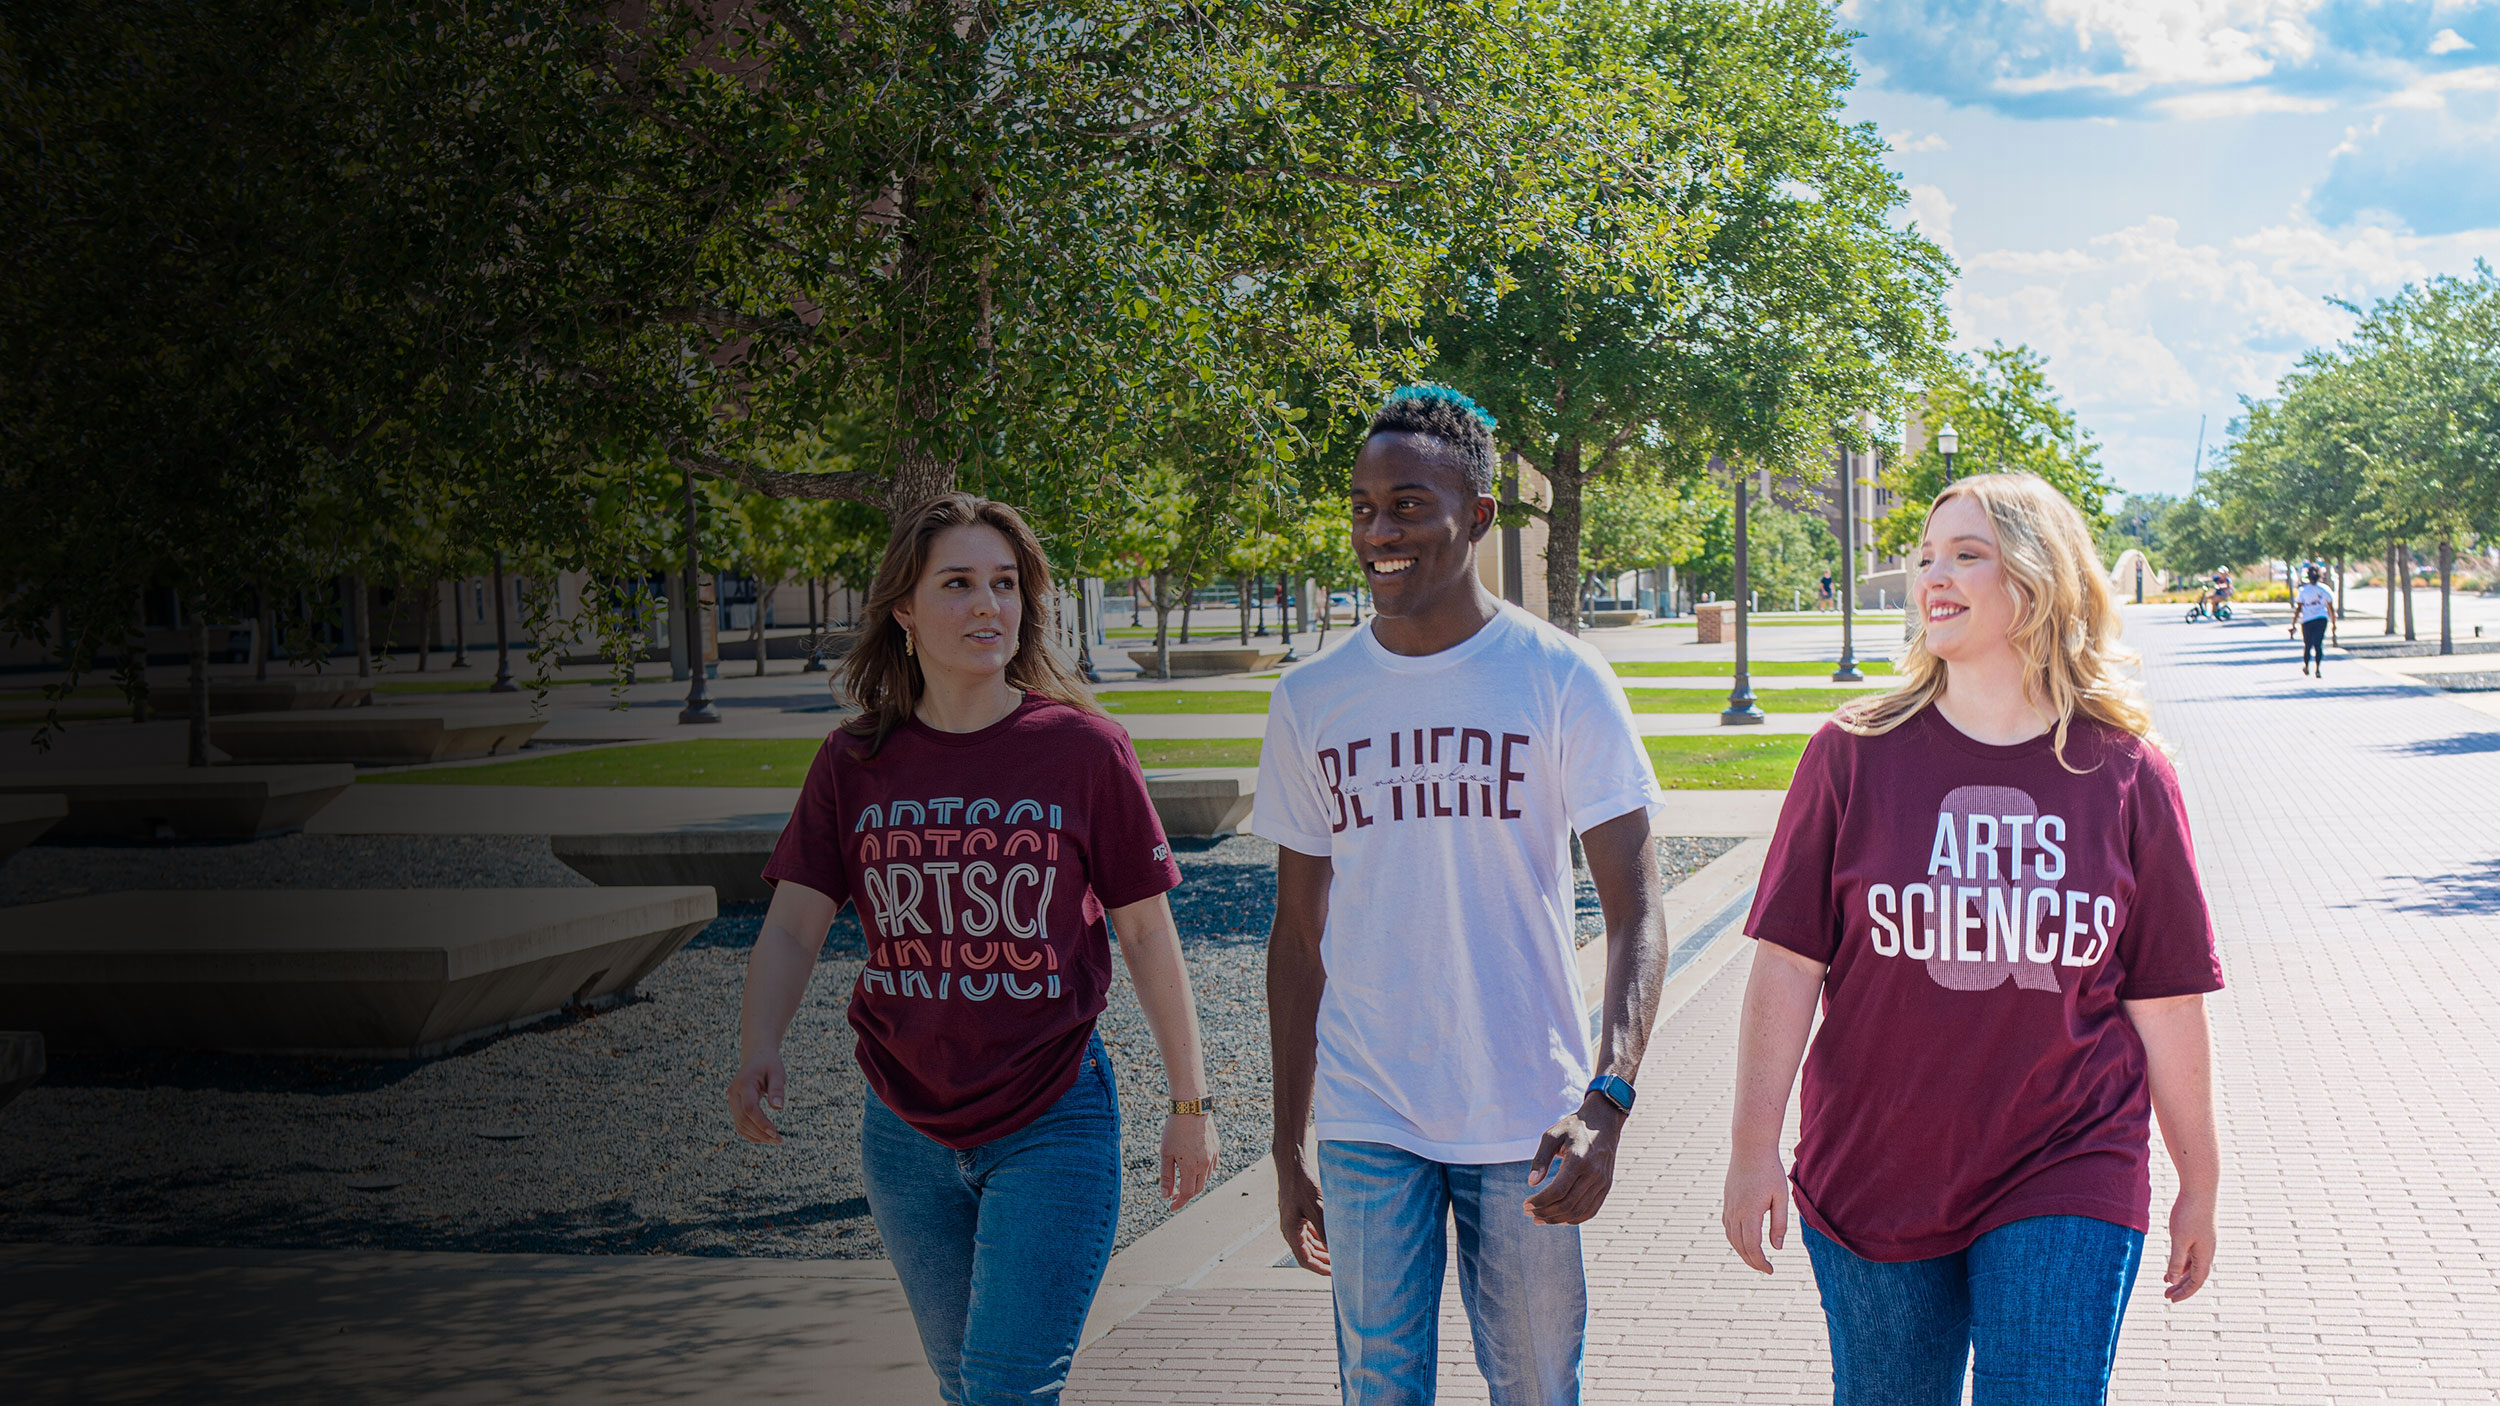 Three Arts and Sciences students walking on the Texas A&M campus.